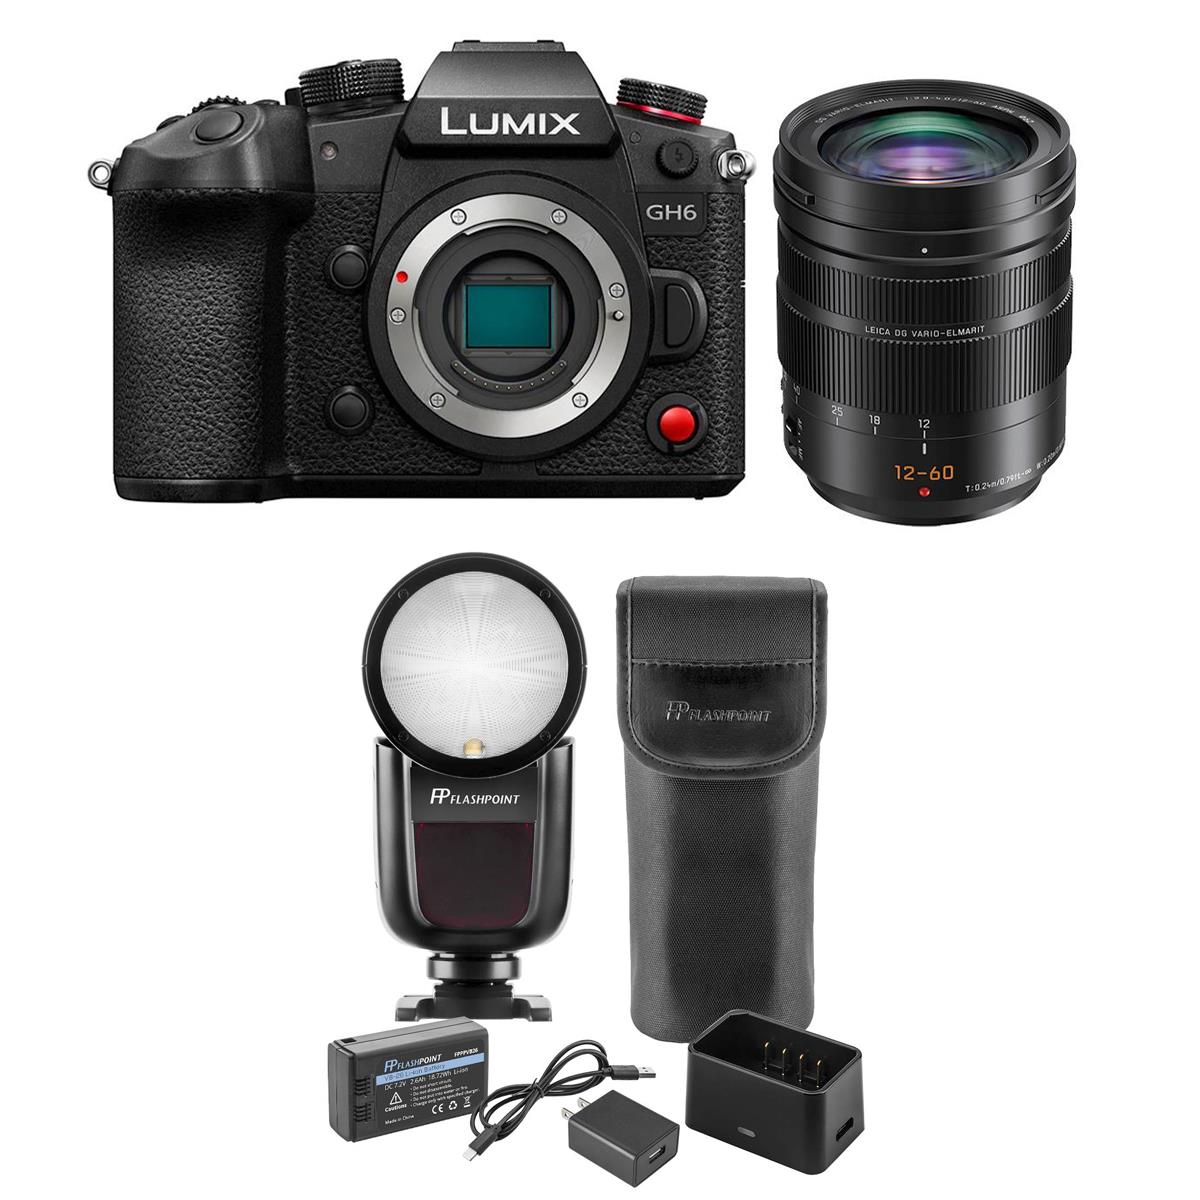 Image of Panasonic Lumix GH6 Mirrorless Camera with 12-60mm Lens with Flash Kit